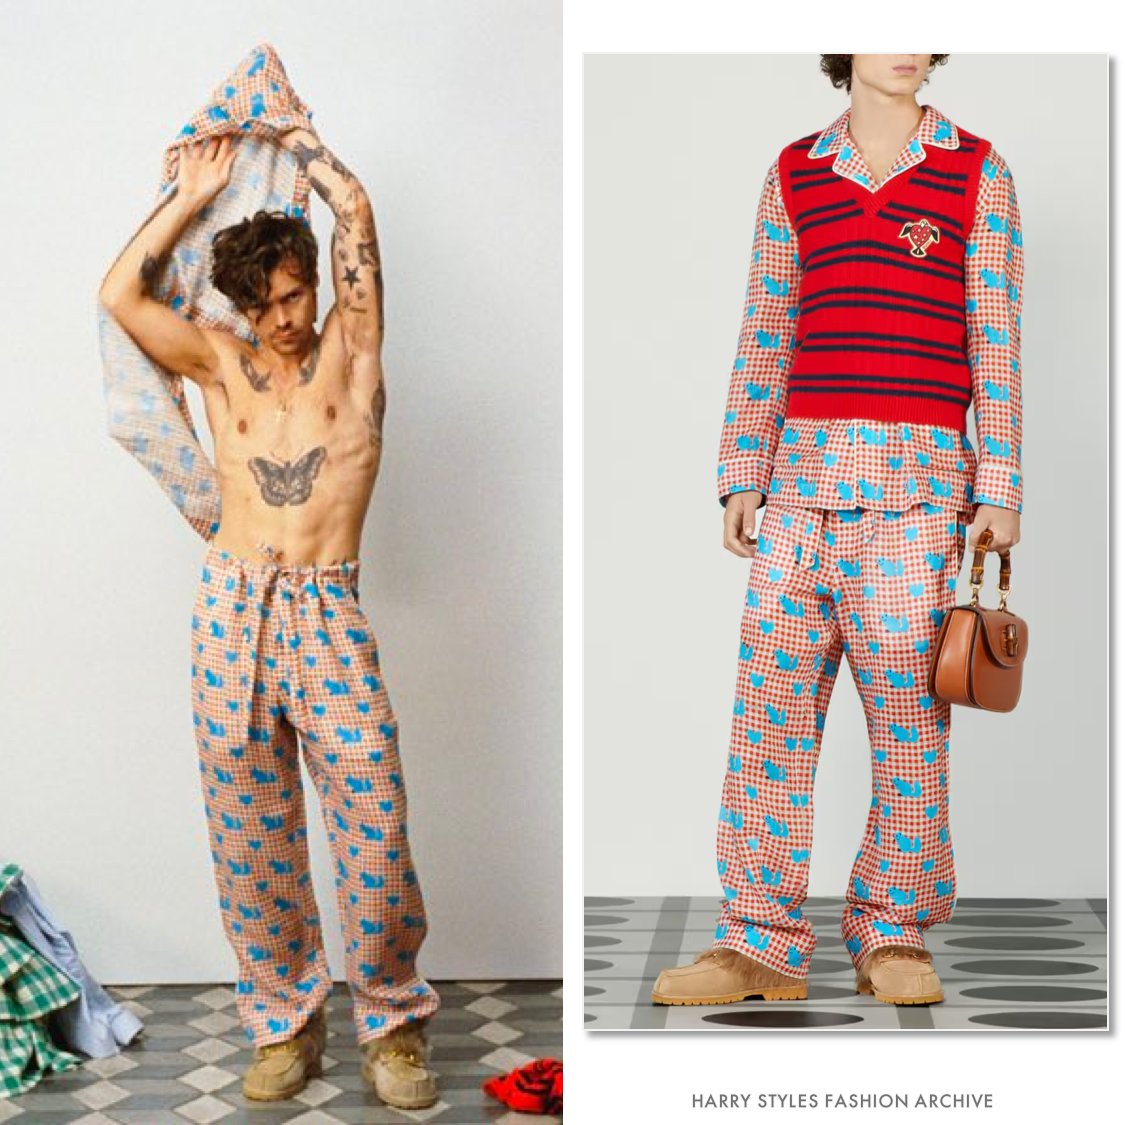 Harry Styles Fashion Archive on Twitter: 